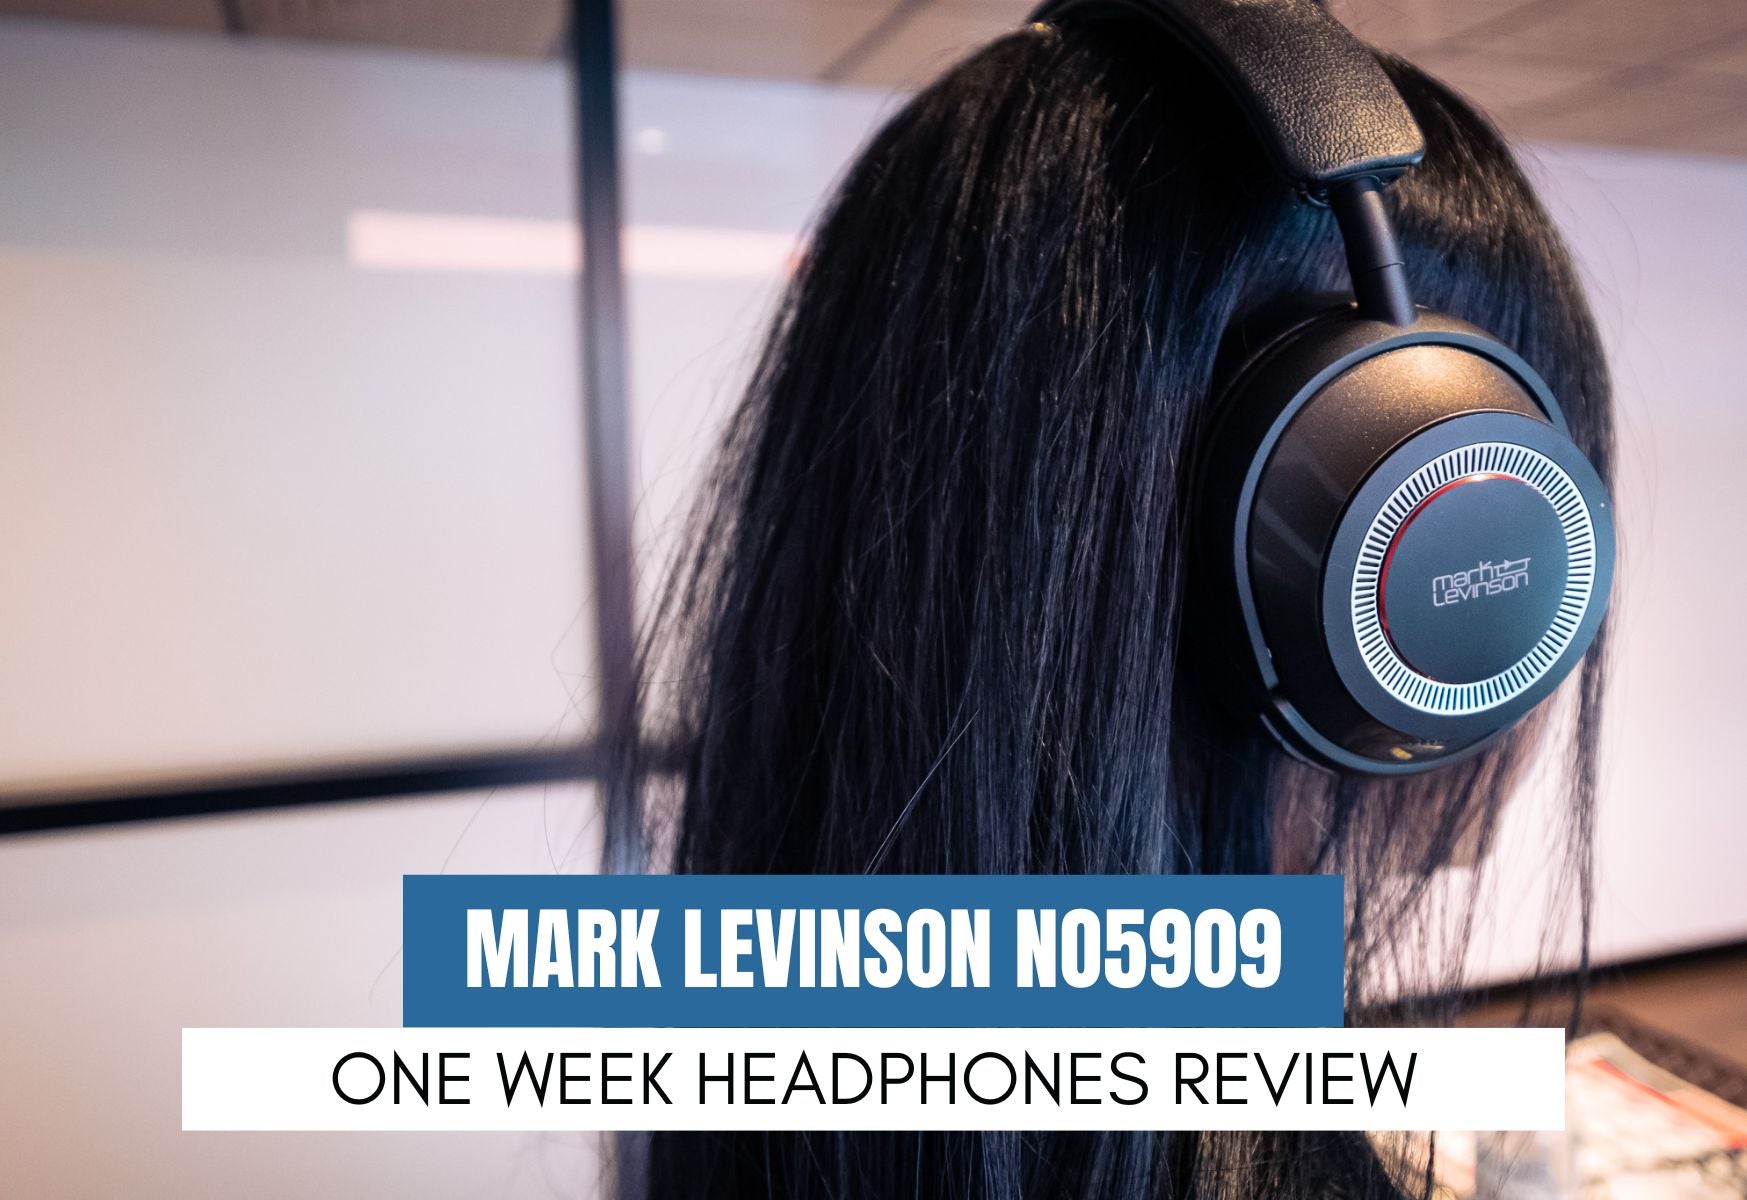 Review: One Week in with the Mark Levinson No5909 Headphones